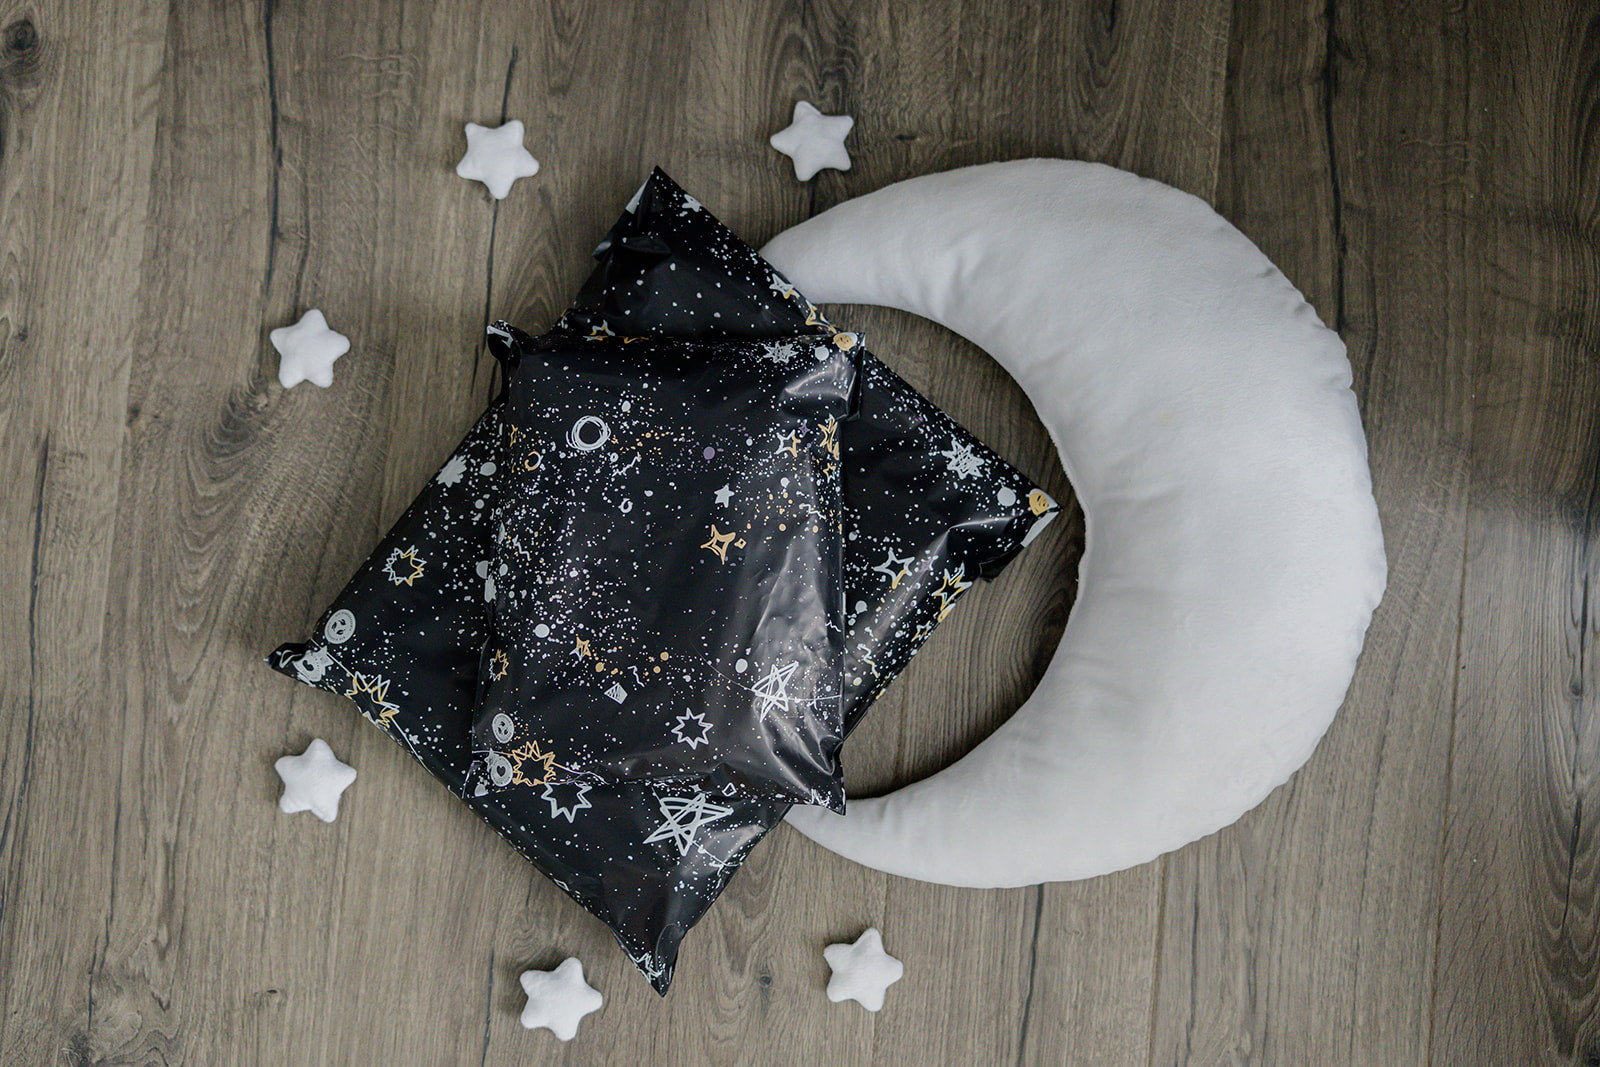 A Midnight Galaxy Mailers 14.5" x 19" pillow with stars and a crescent laying on a wooden floor, made by impack.co.